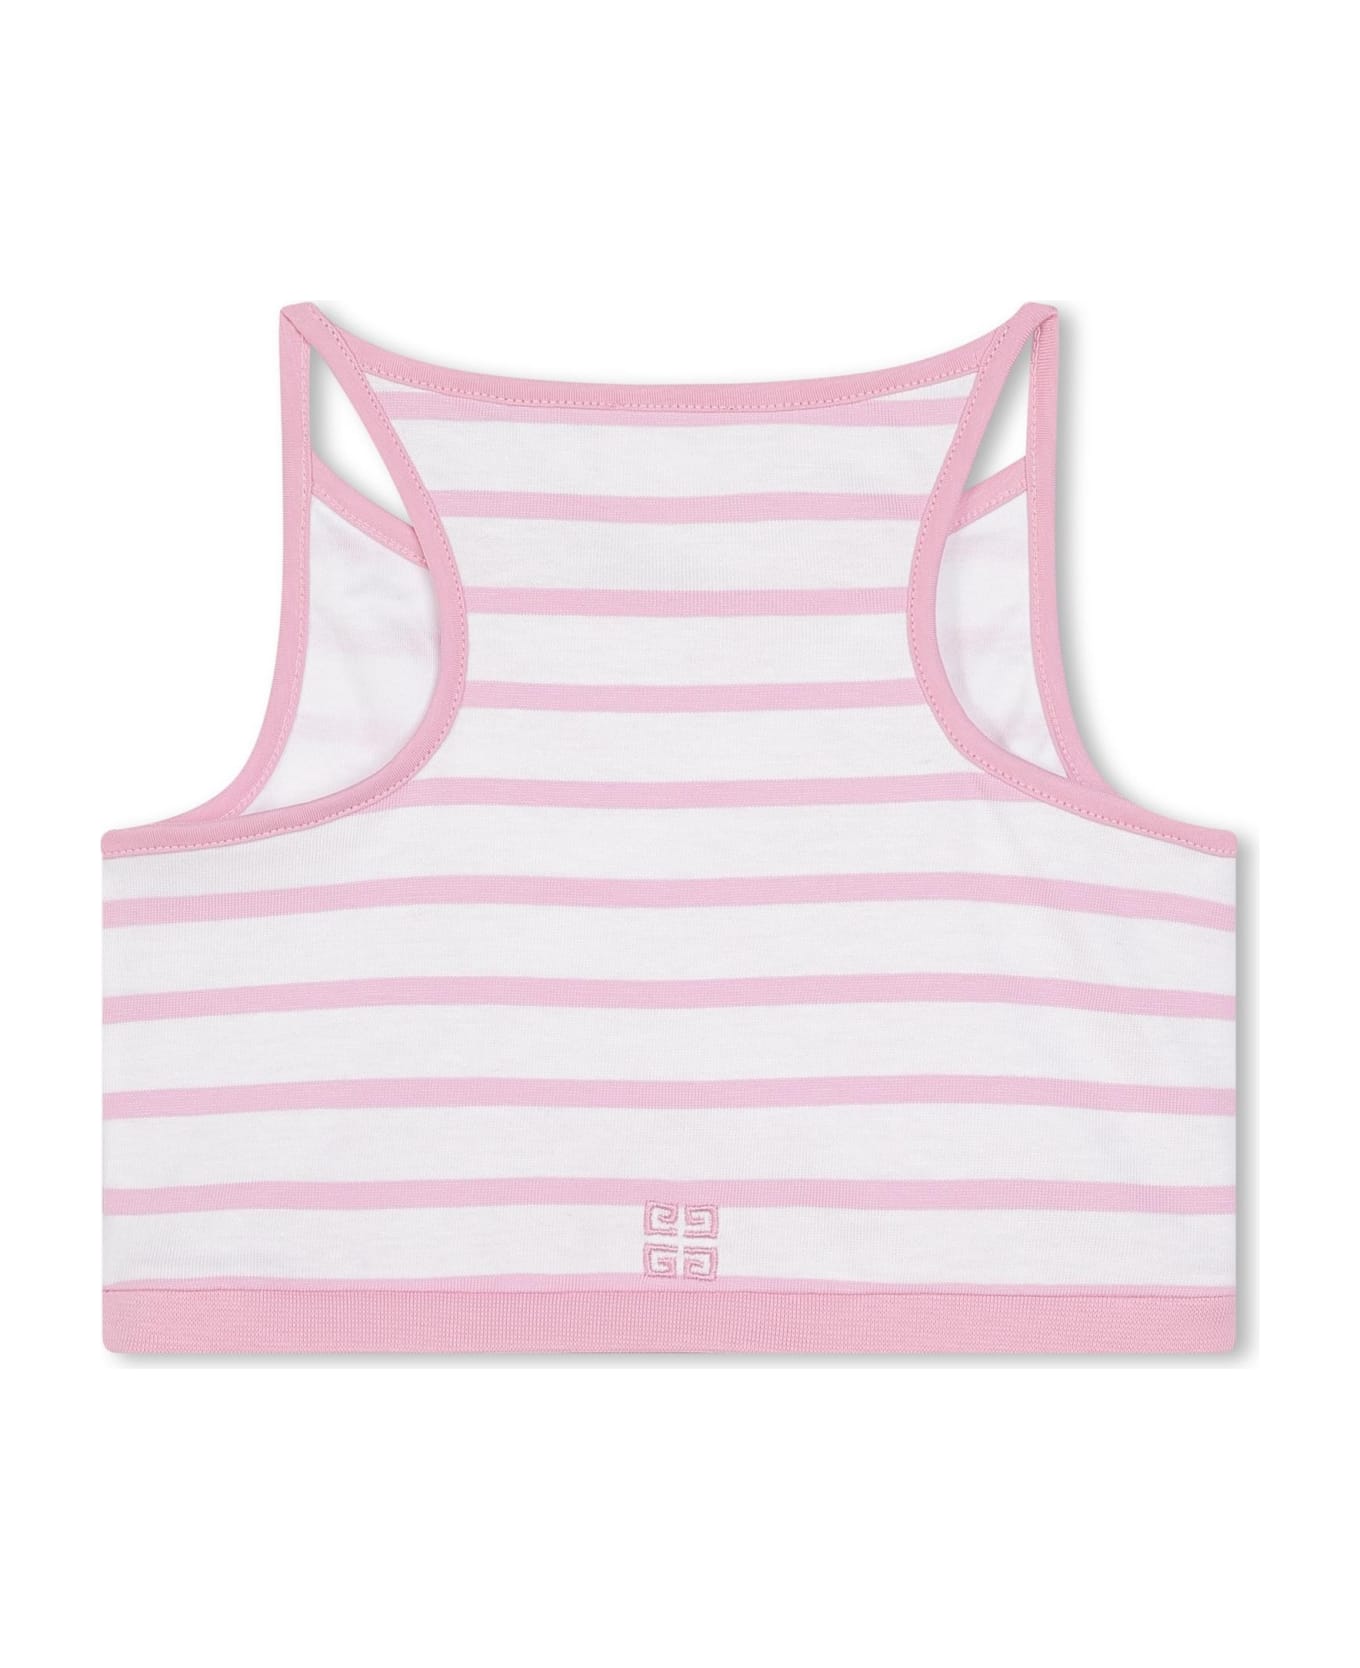 Givenchy Crop Top With Striped Embroidery - Rosa